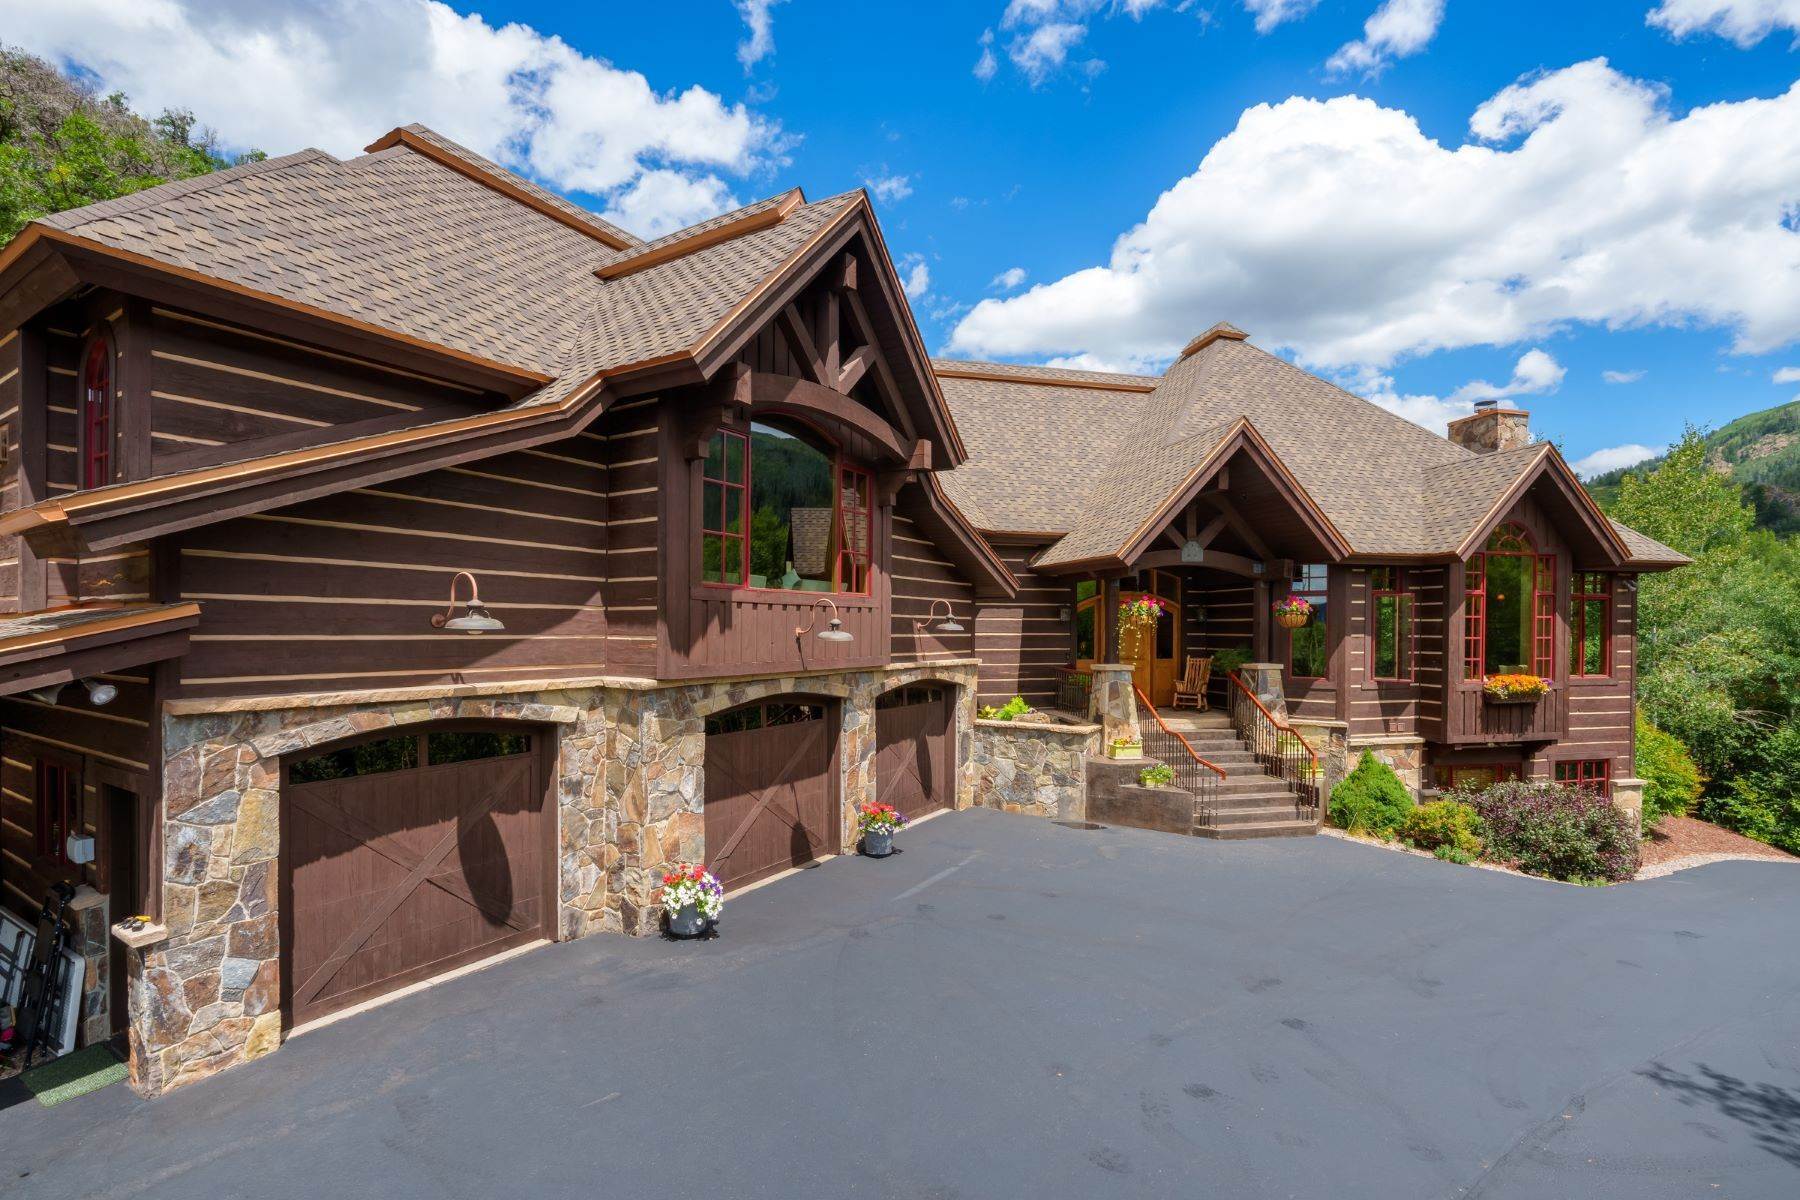 Property for Sale at 3050 Clearwater Trail, Steamboat Springs, CO, 80487 3050 Clearwater Trail Steamboat Springs, Colorado 80487 United States